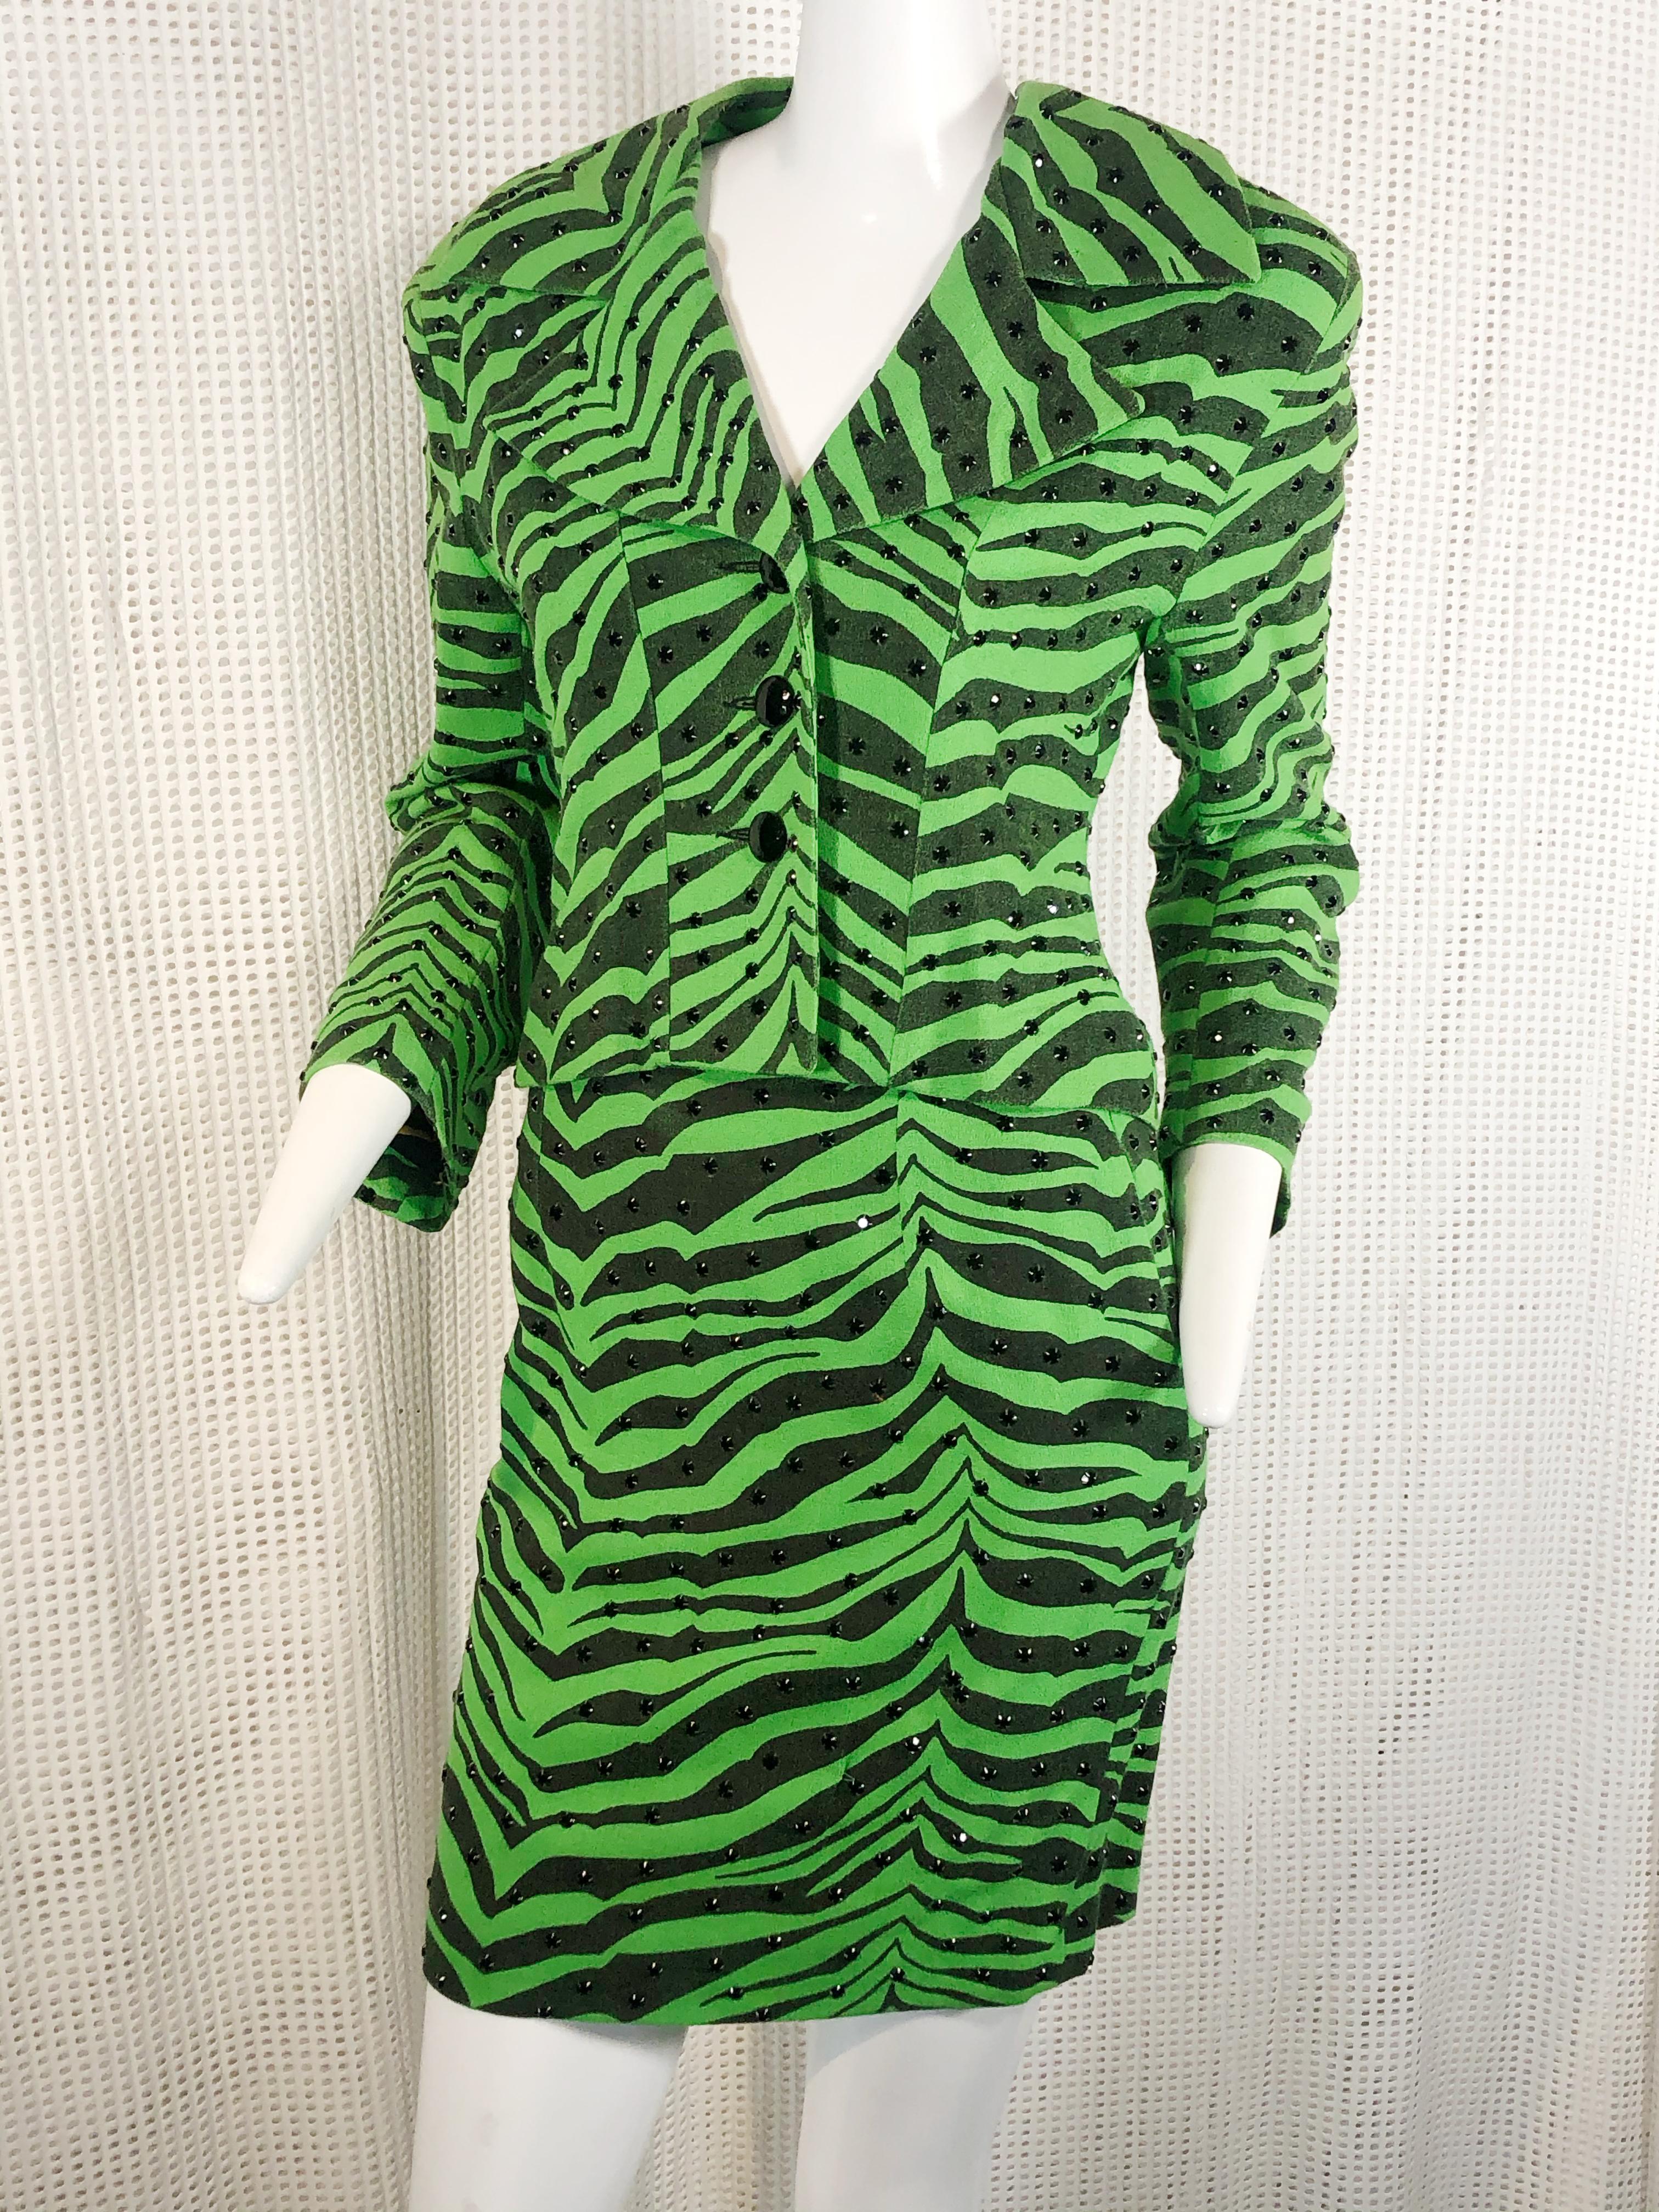 A 1980s Todd Oldham electric green and black zebra print wool suit. Lined in yellow zebra print charmeuse.  Black rhinestone prong set studs scattered over entire suit.   Black glass buttons.